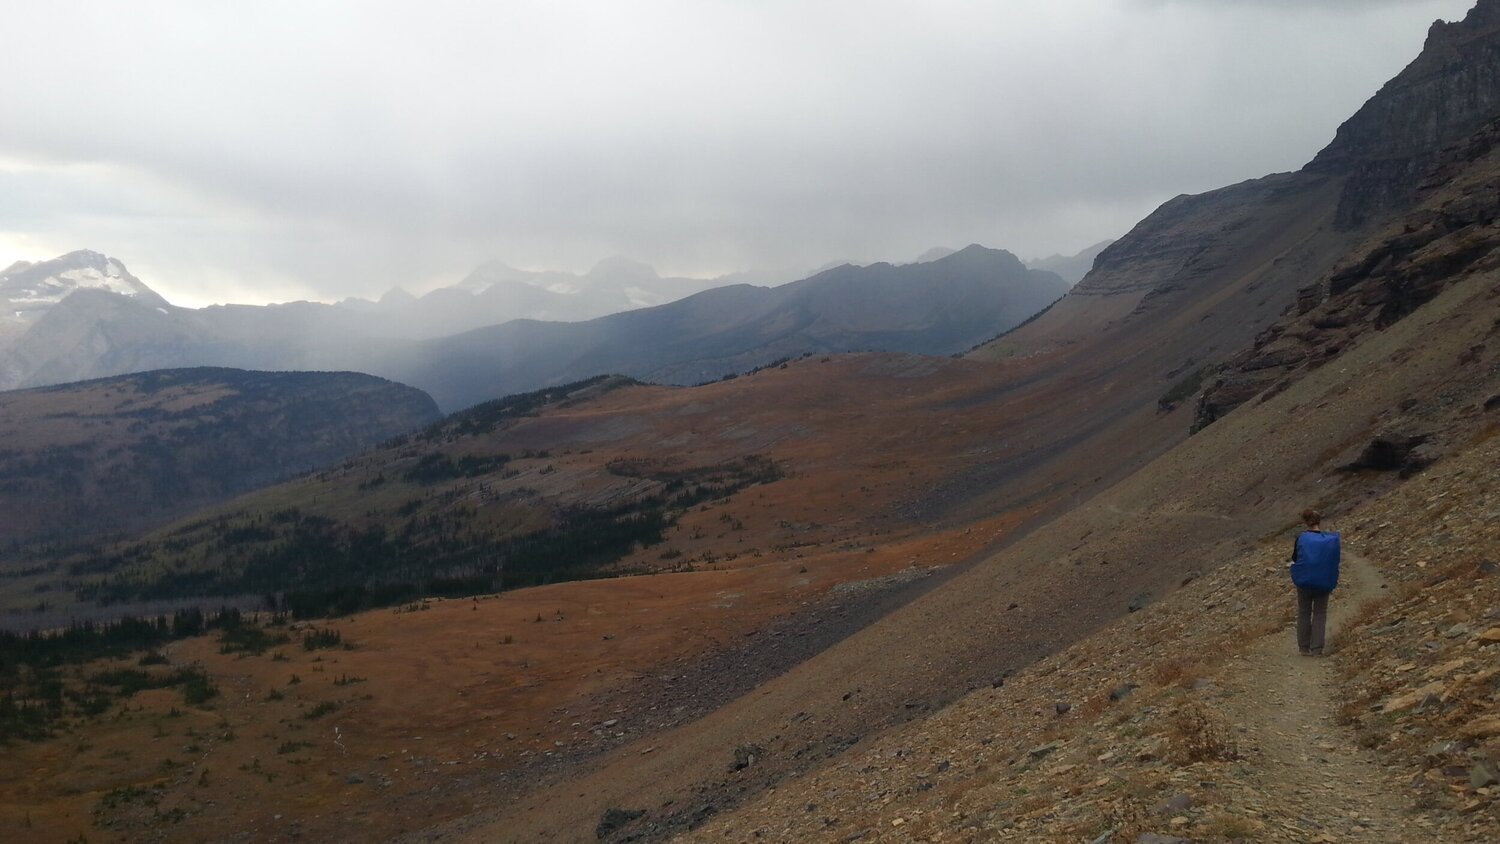 A hiker on a rocky trail in Glacier National Park with misty mountains in the distance